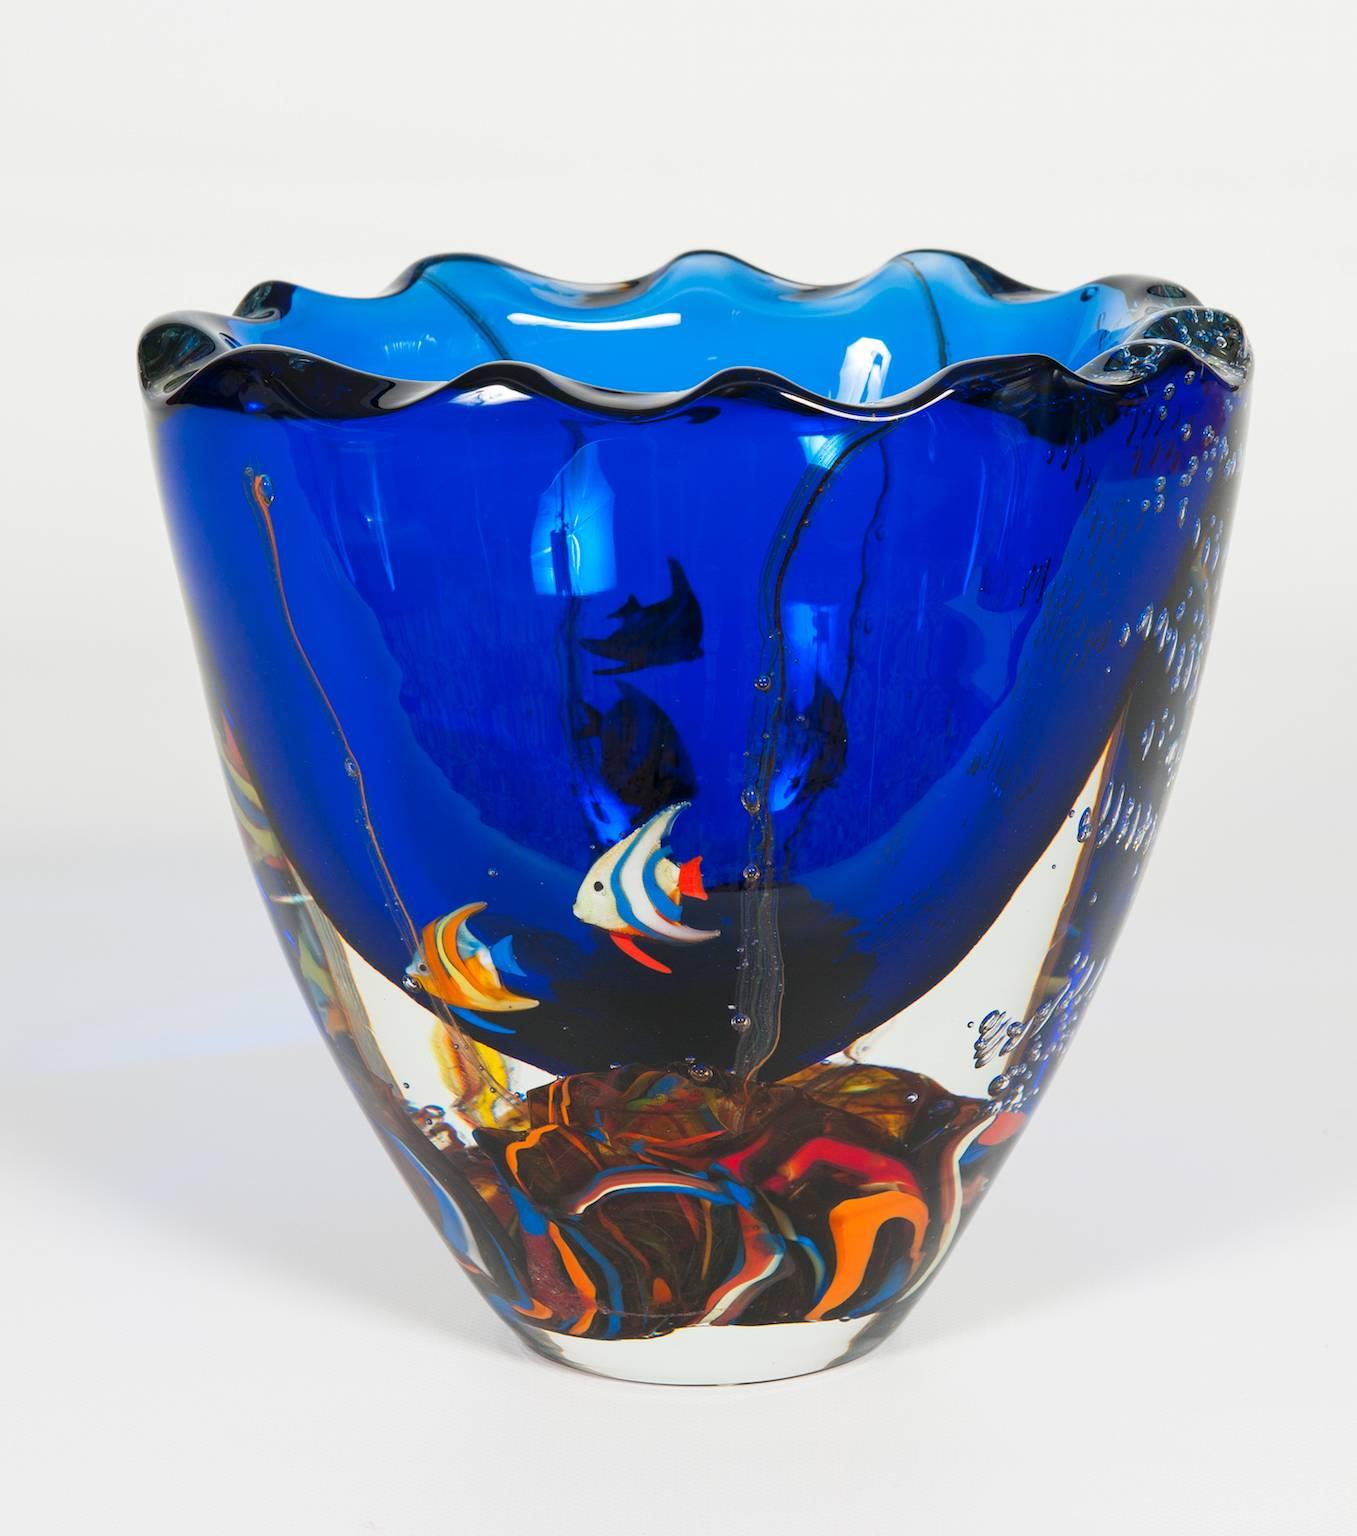 Massive Italian Vase Aquarium with fishes in blown Murano Glass, 1980s.
This is an authentic masterpiece Aquarium Vase, it is made up of a submerged ocean of fishes sculptures inside the vase itself.
 It is a fantastic ocean floor submerged with in